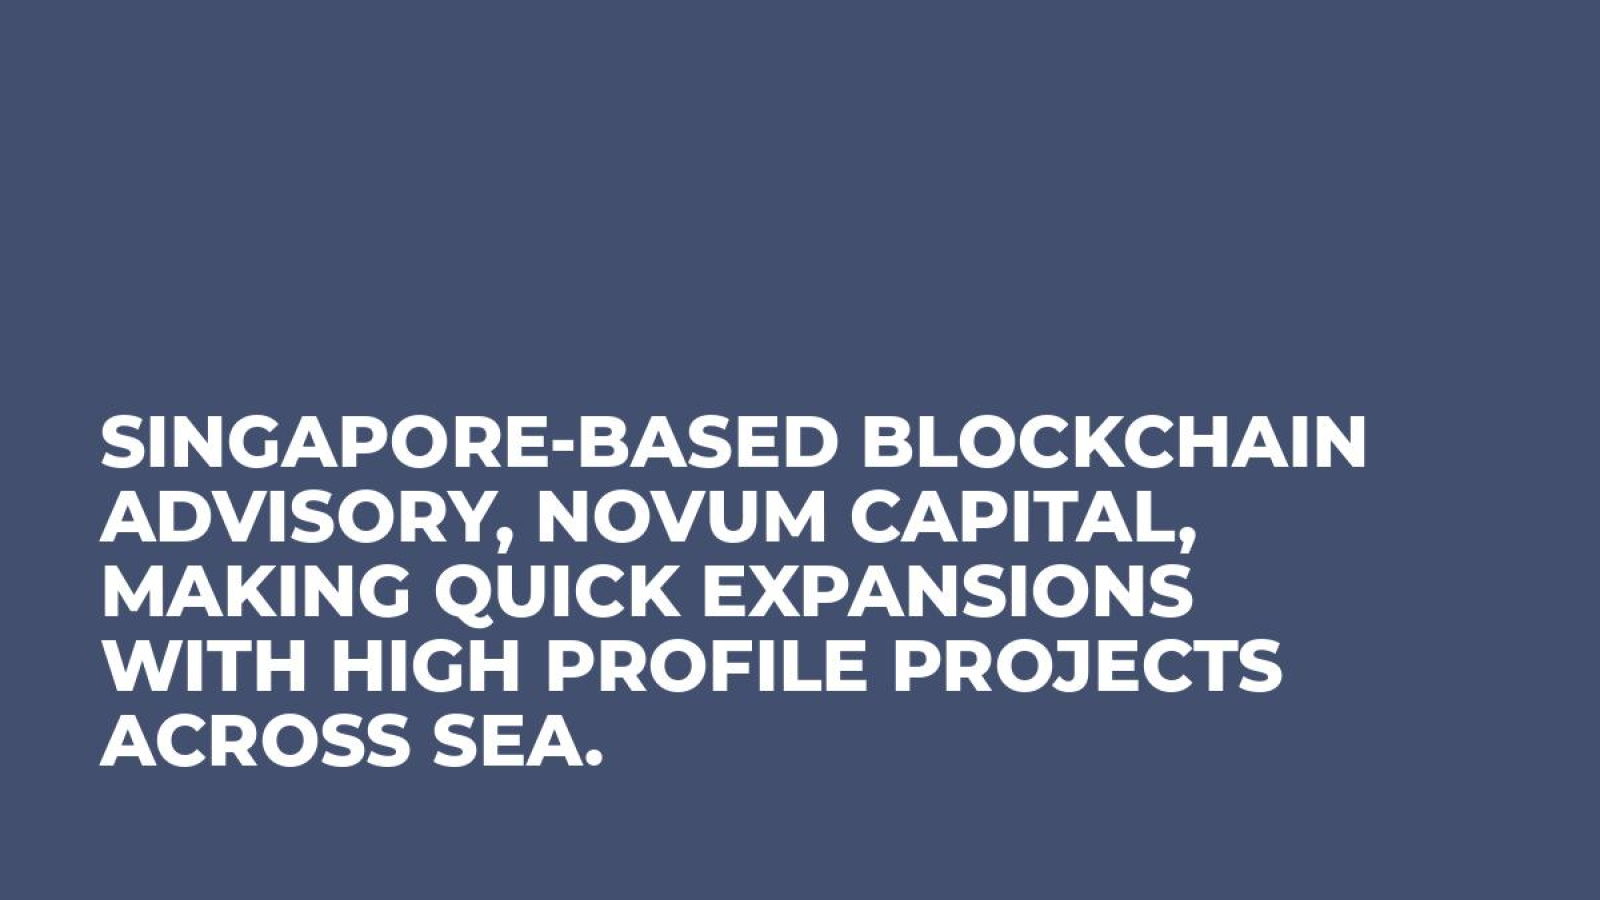 Singapore-based blockchain advisory, Novum Capital, making quick expansions with high profile projects across SEA.